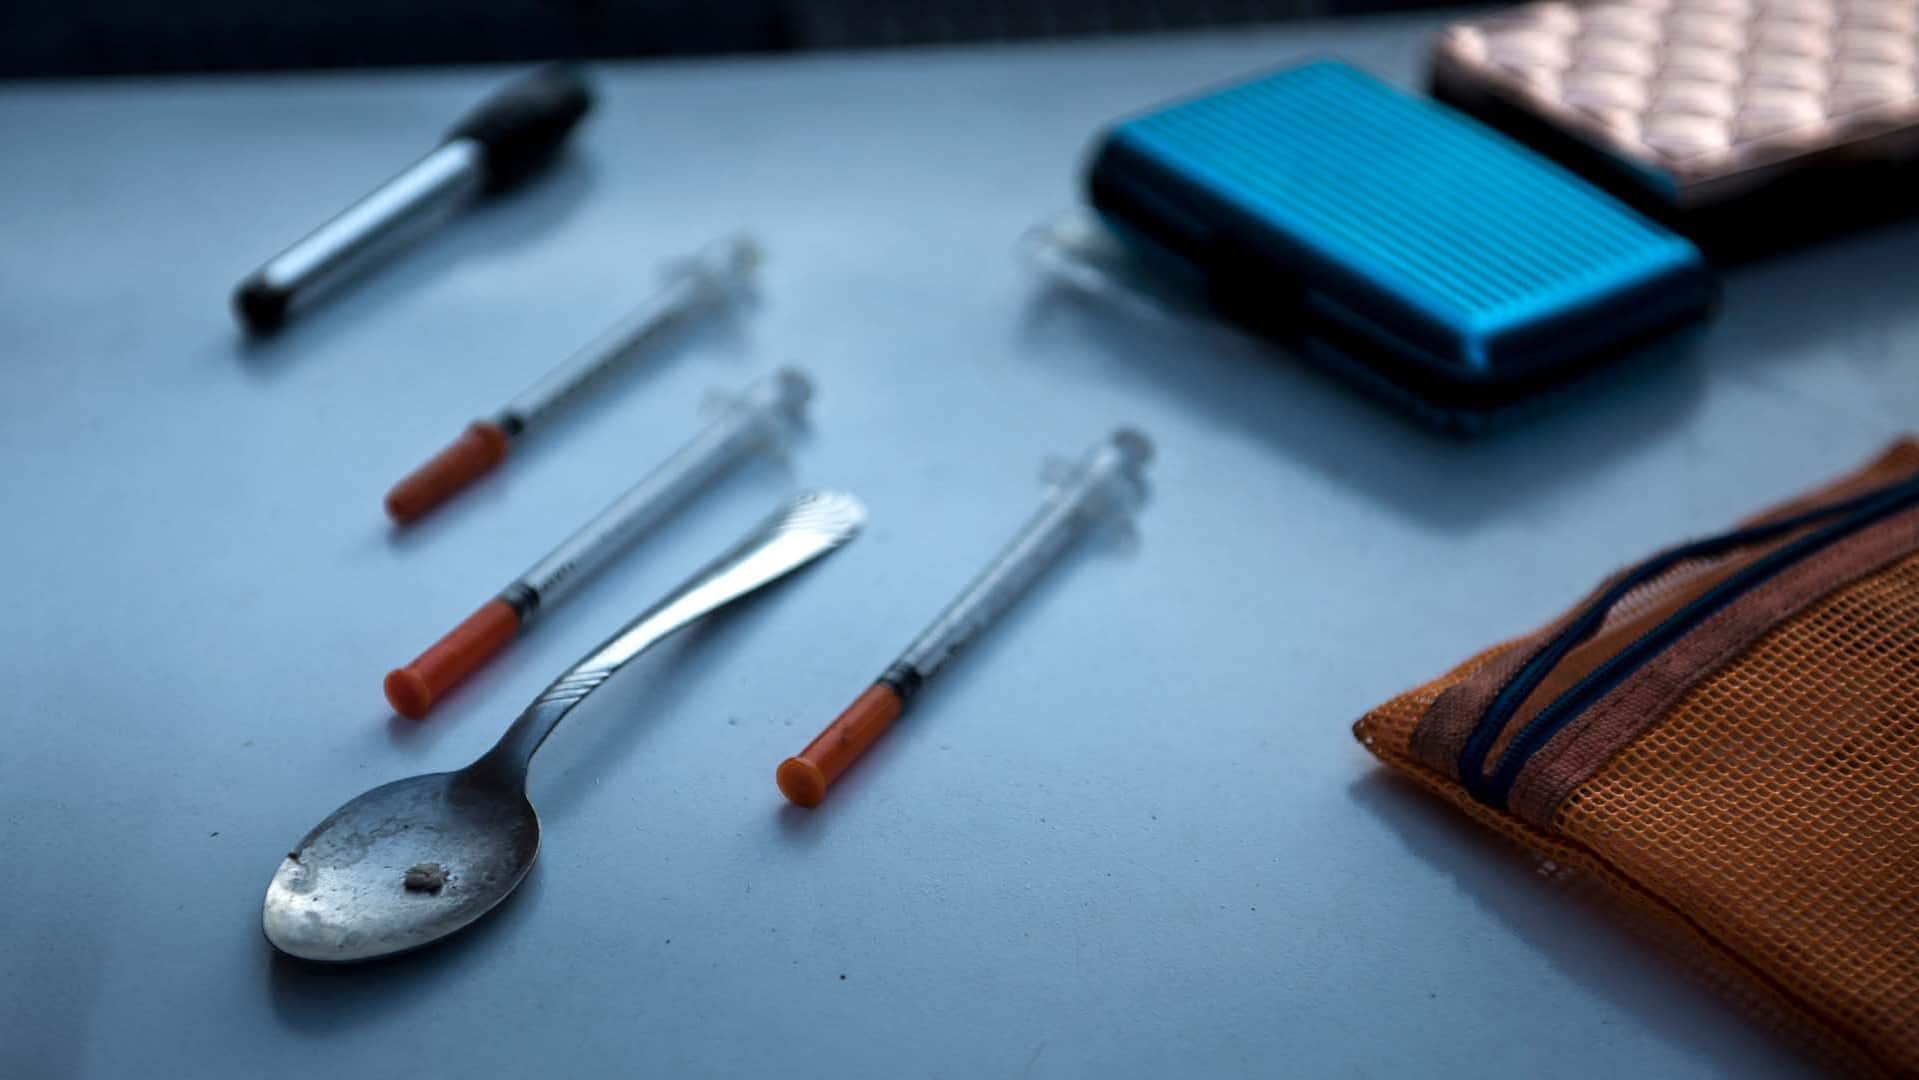 B.C.'s top court rejects province's attempt to appeal pause of public drug use law